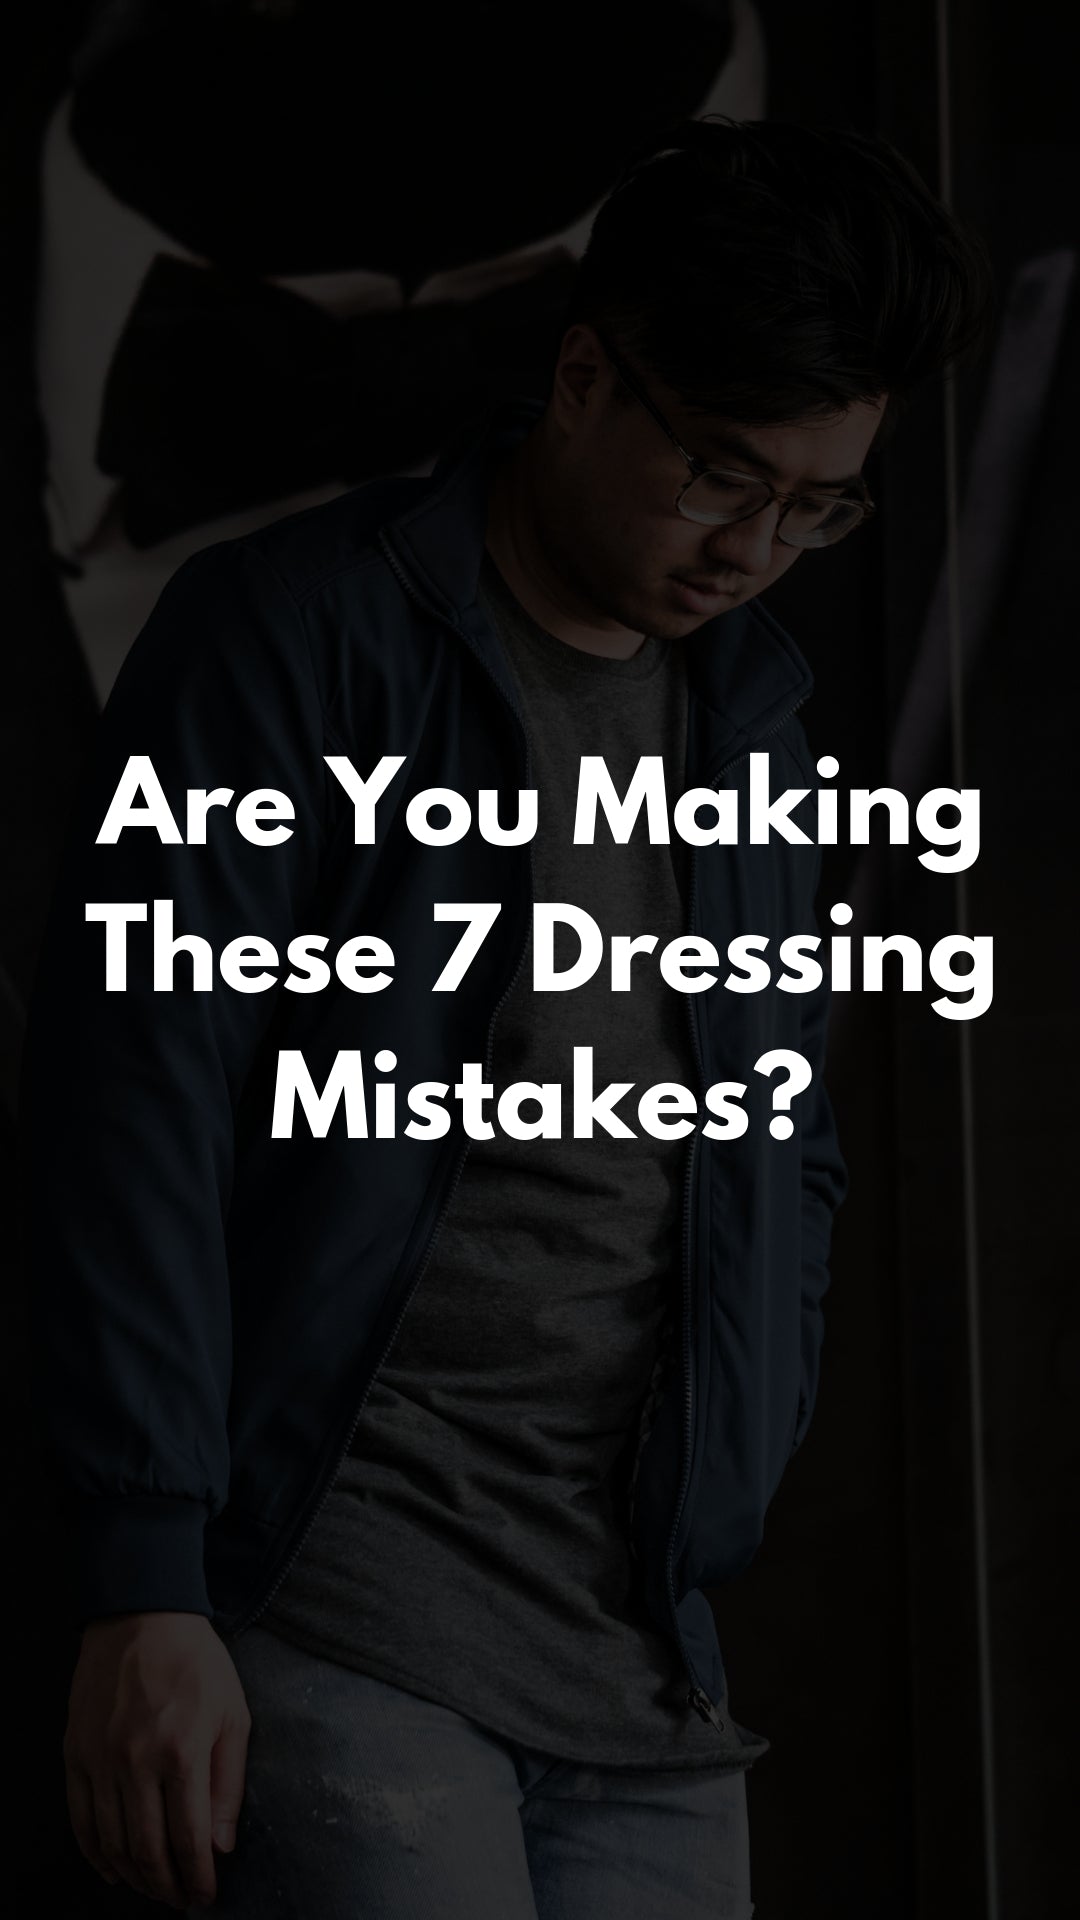 Are You Making These 7 Dressing Mistakes? #style #mistakes #fashiontips #styletips